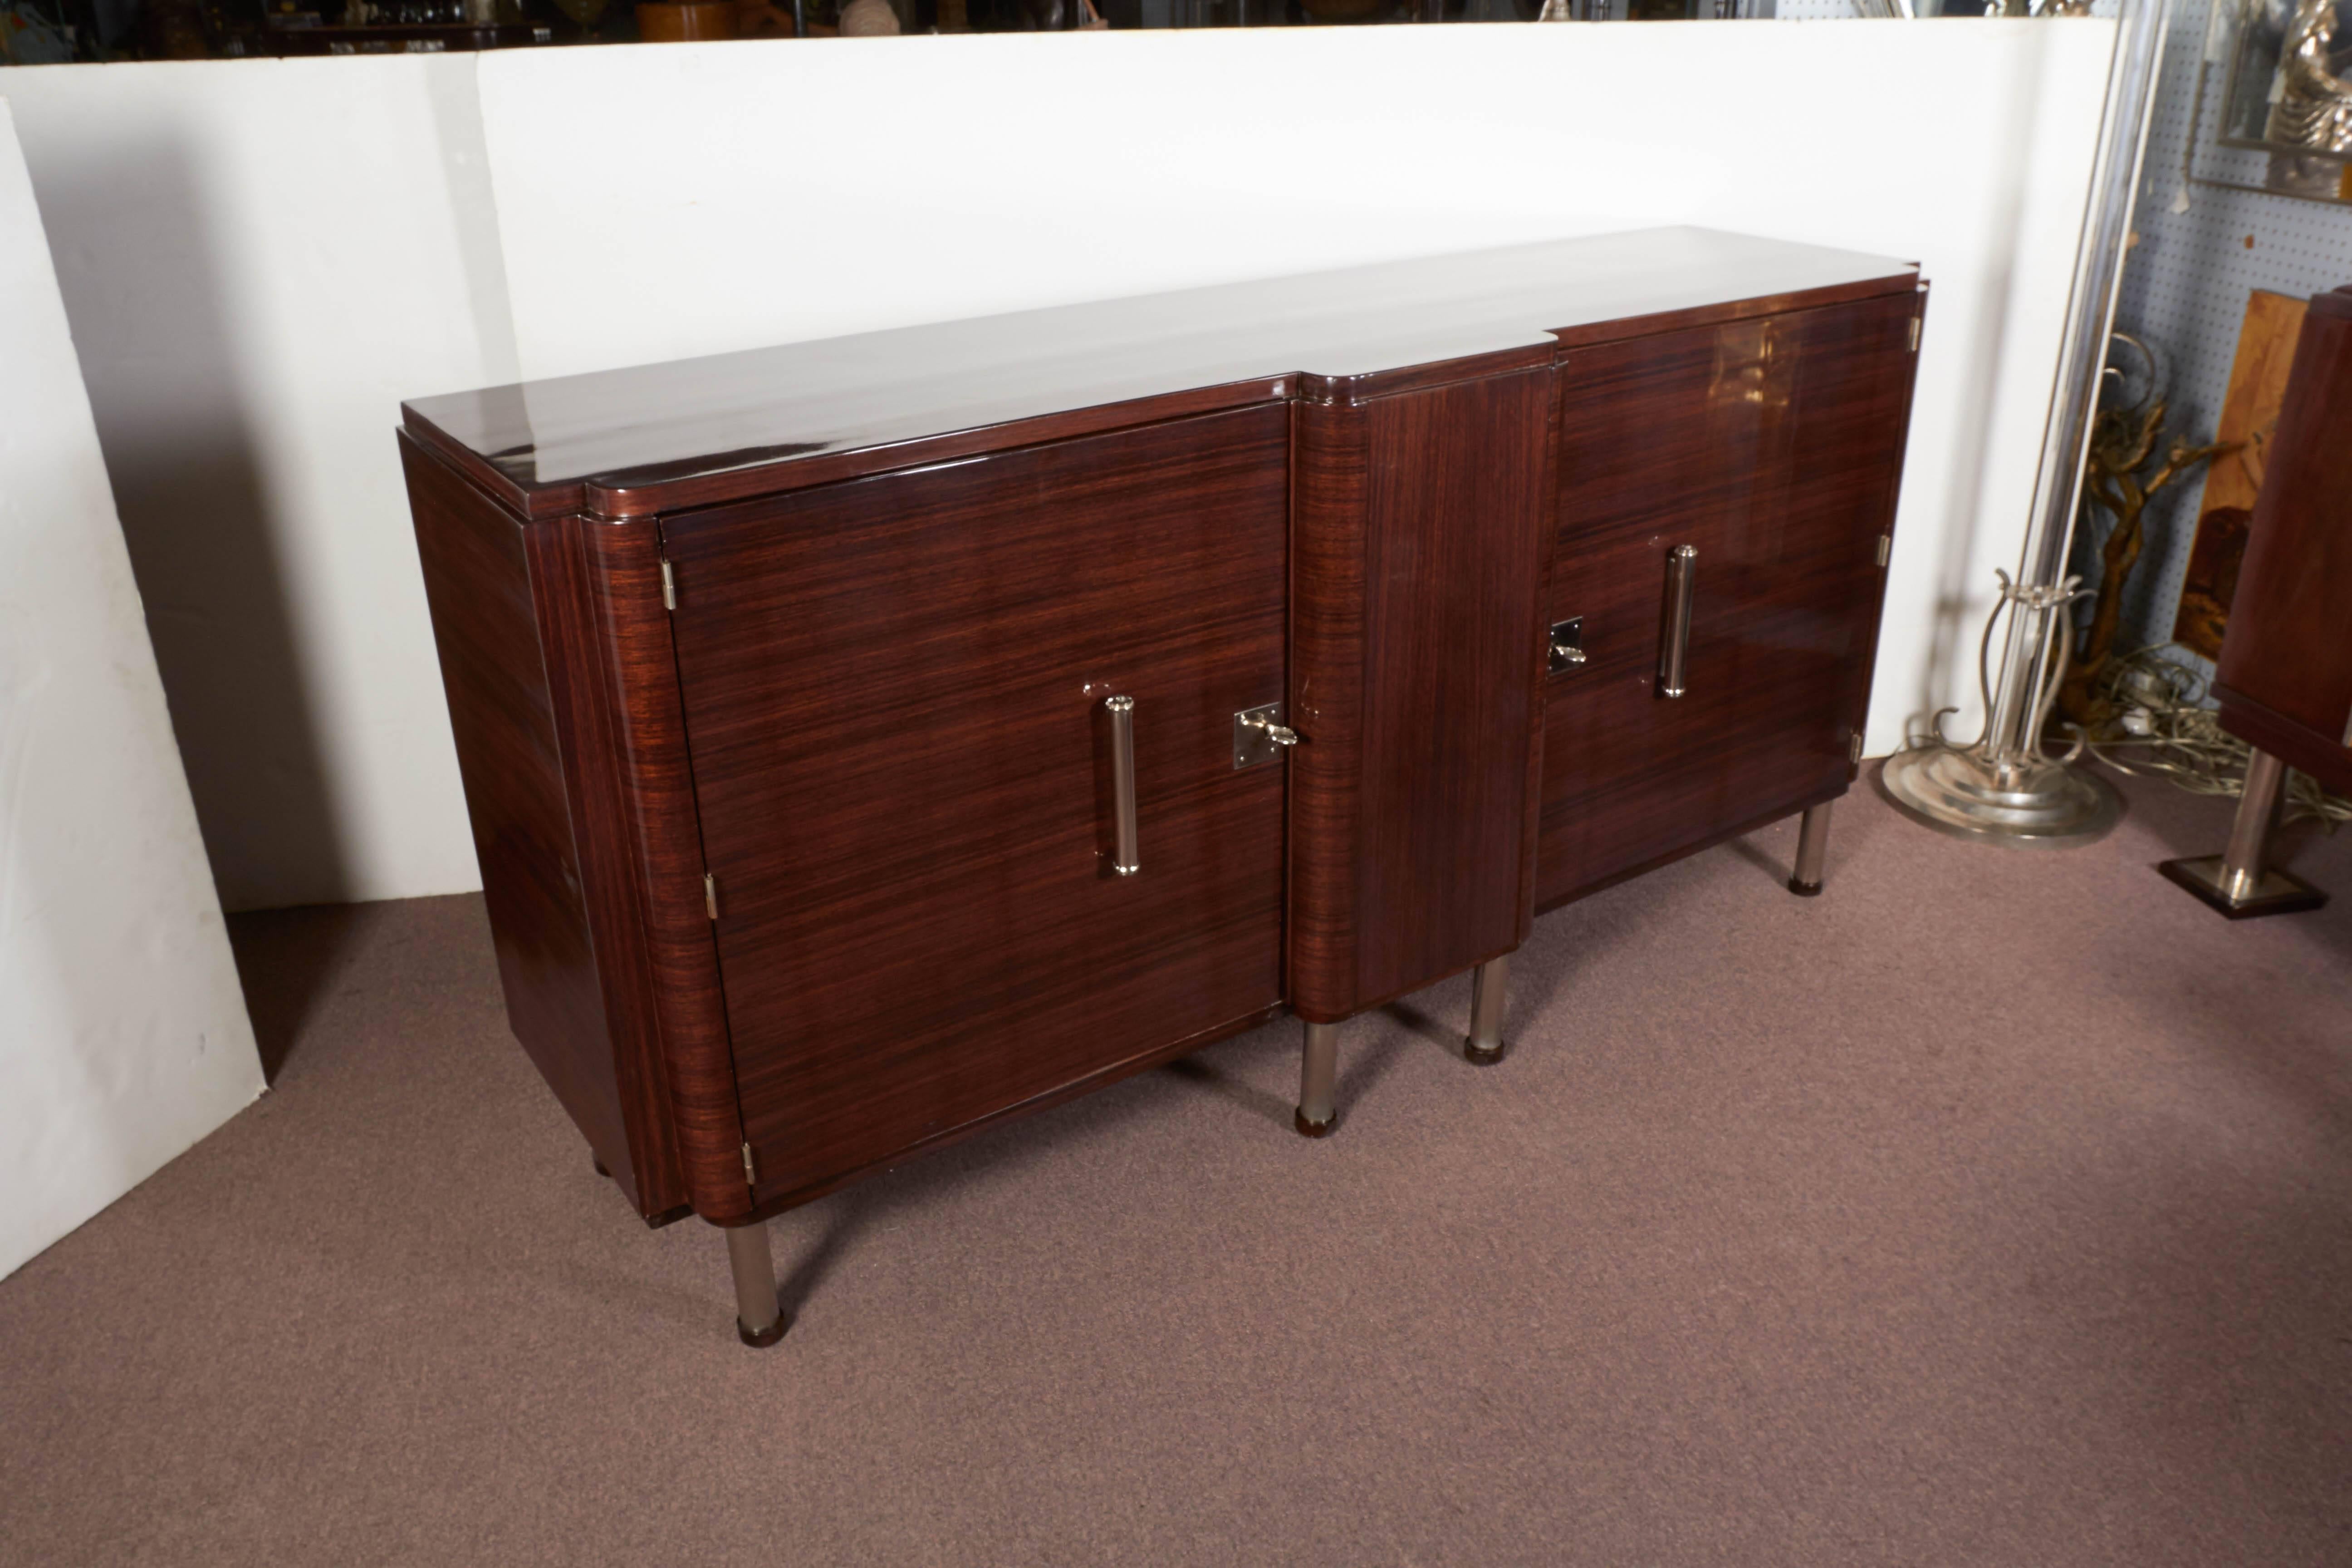 French Modernist sideboard in exquisite palissander showing fine detailed craftsmanship.
The wood grain runs horizontal while the cabinet boasts square edges cornered by radius curves, a lovely bullnose front and nickeled bronze mounts. The hardware